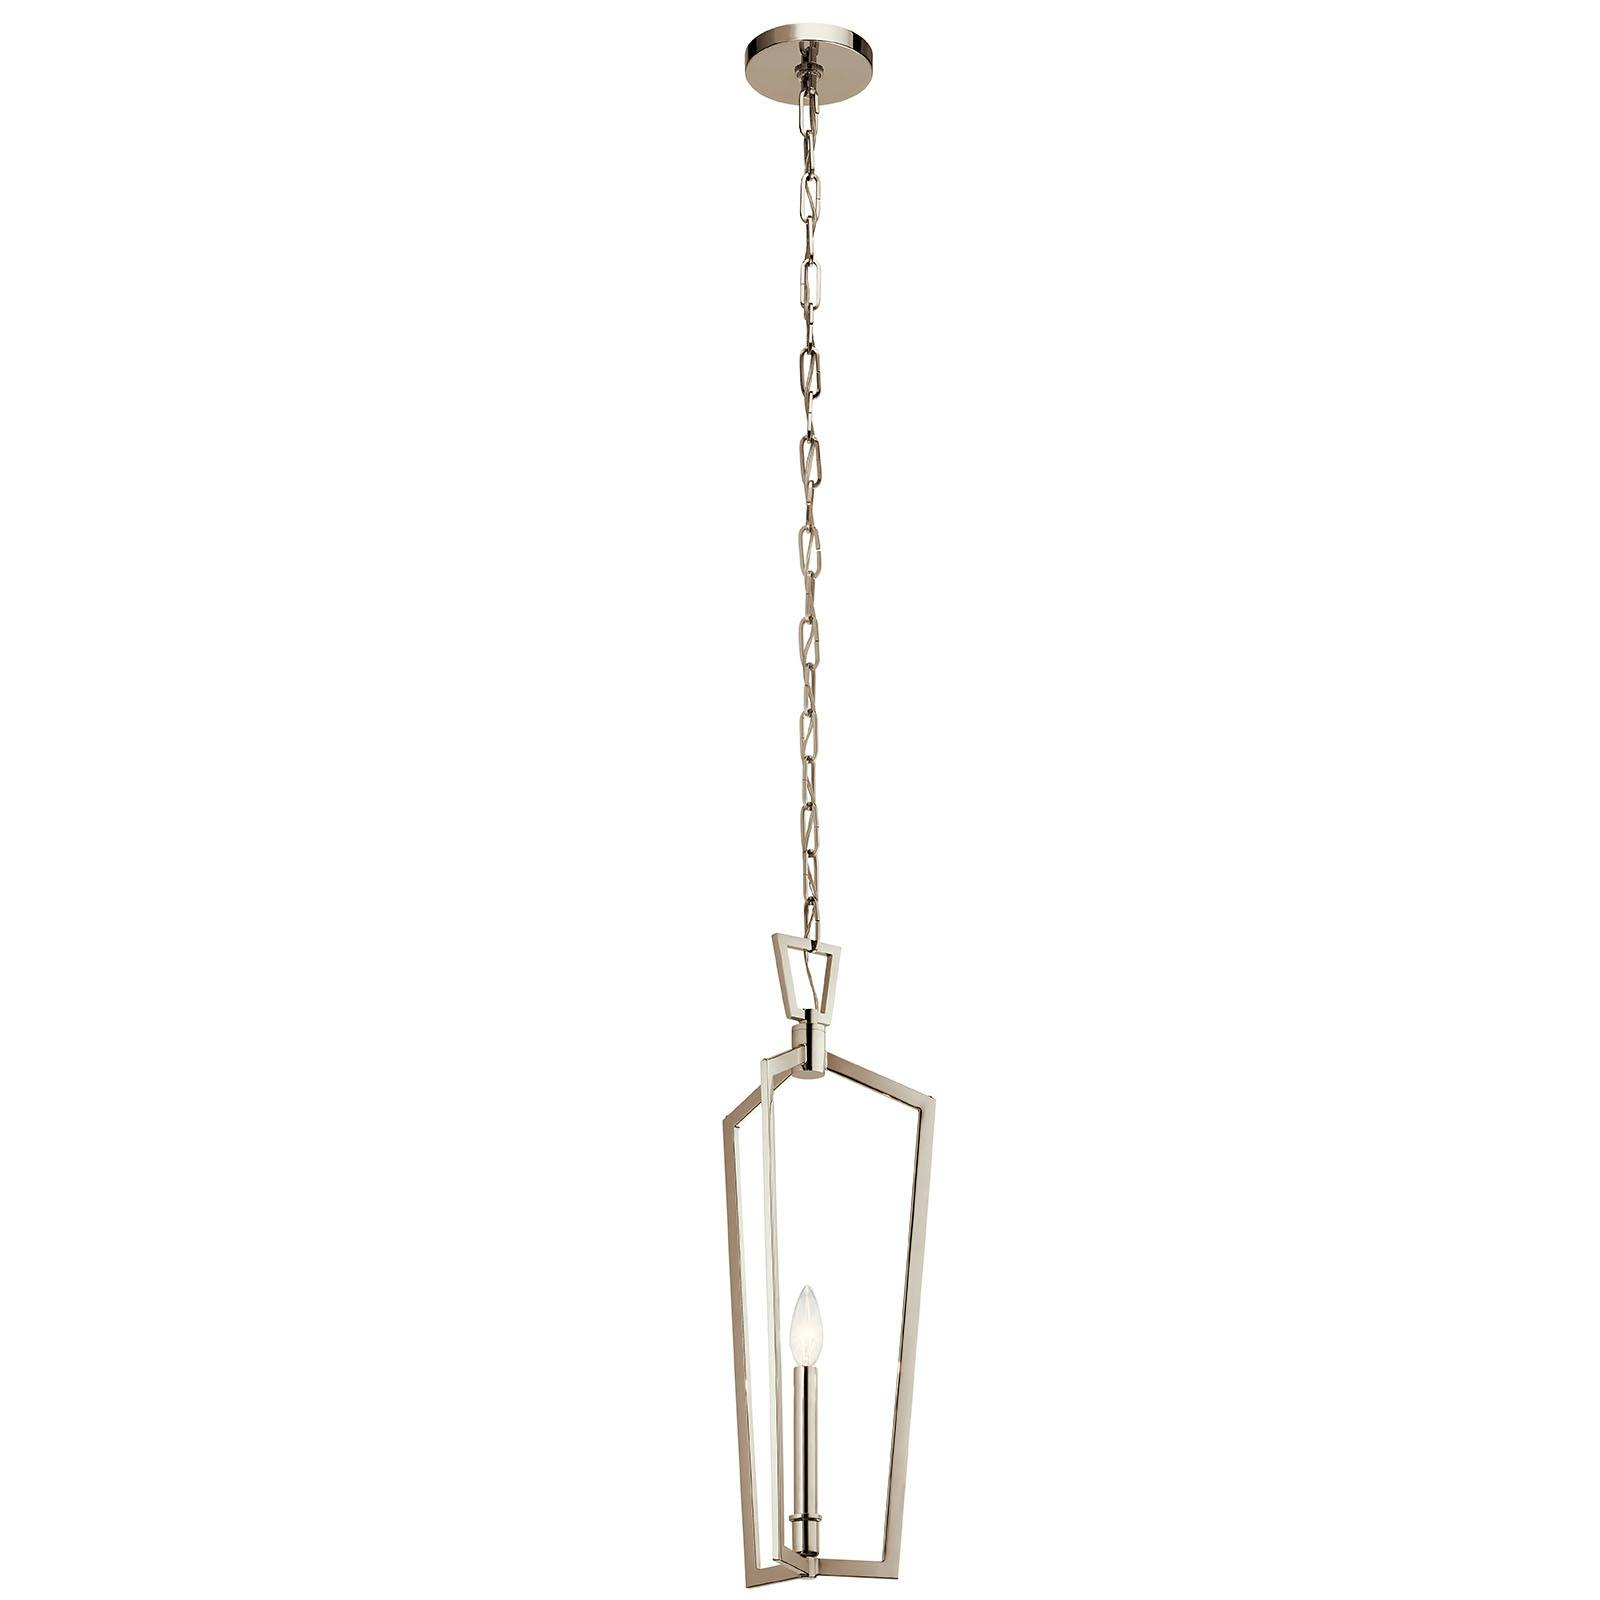 Abbotswell 23.5" Mini Pendant Nickel on a white background